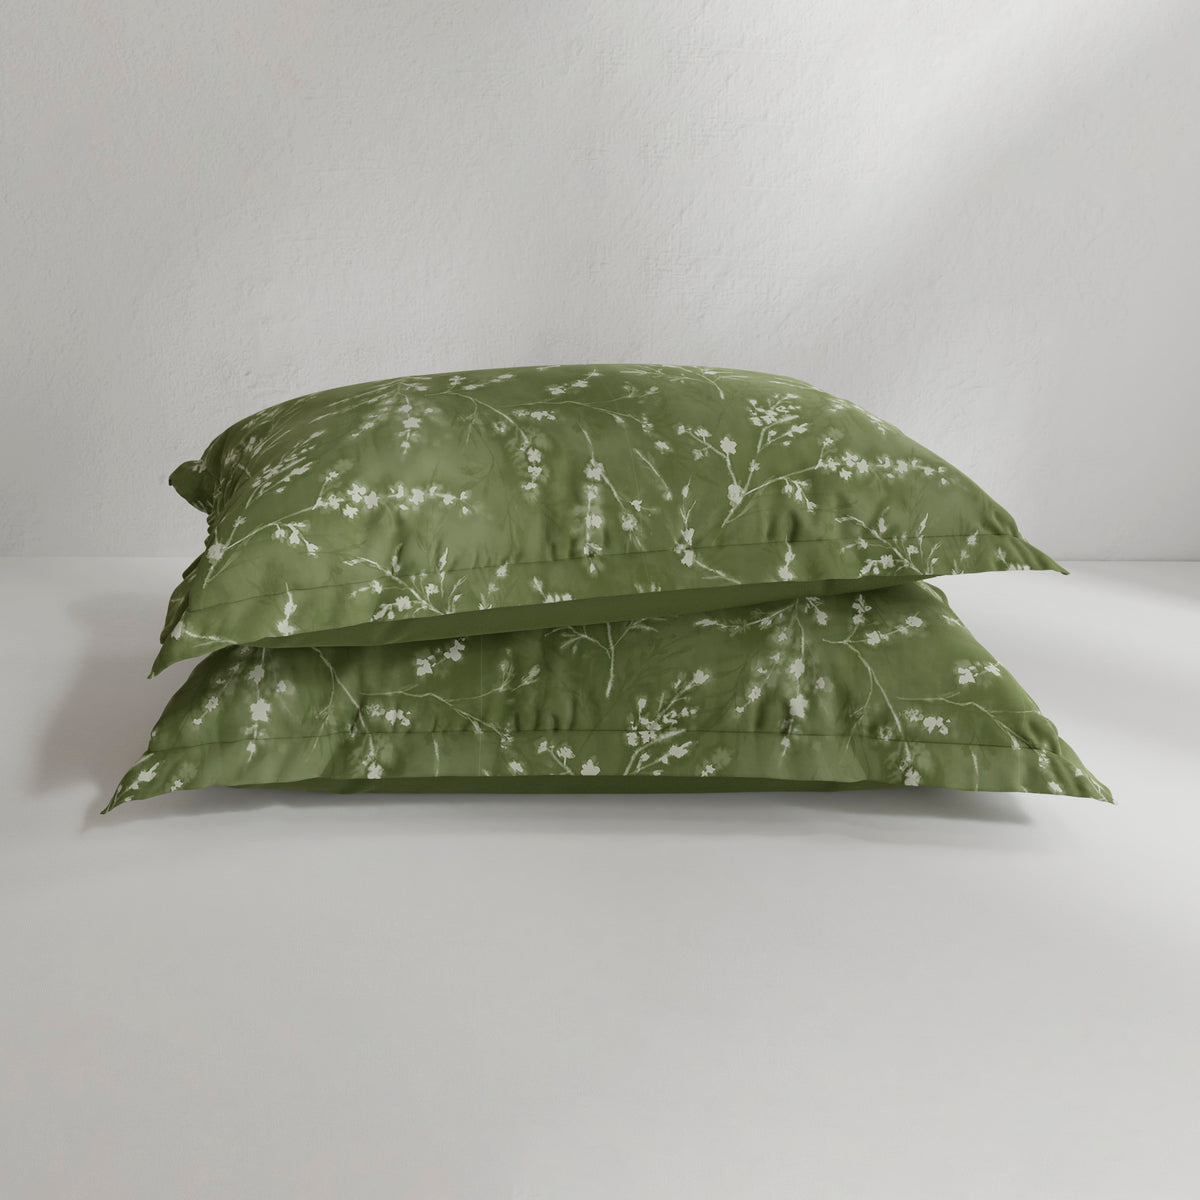 Image of two Floral Evergreen Pillow Shams on pillows stacked on top of each other with a white background